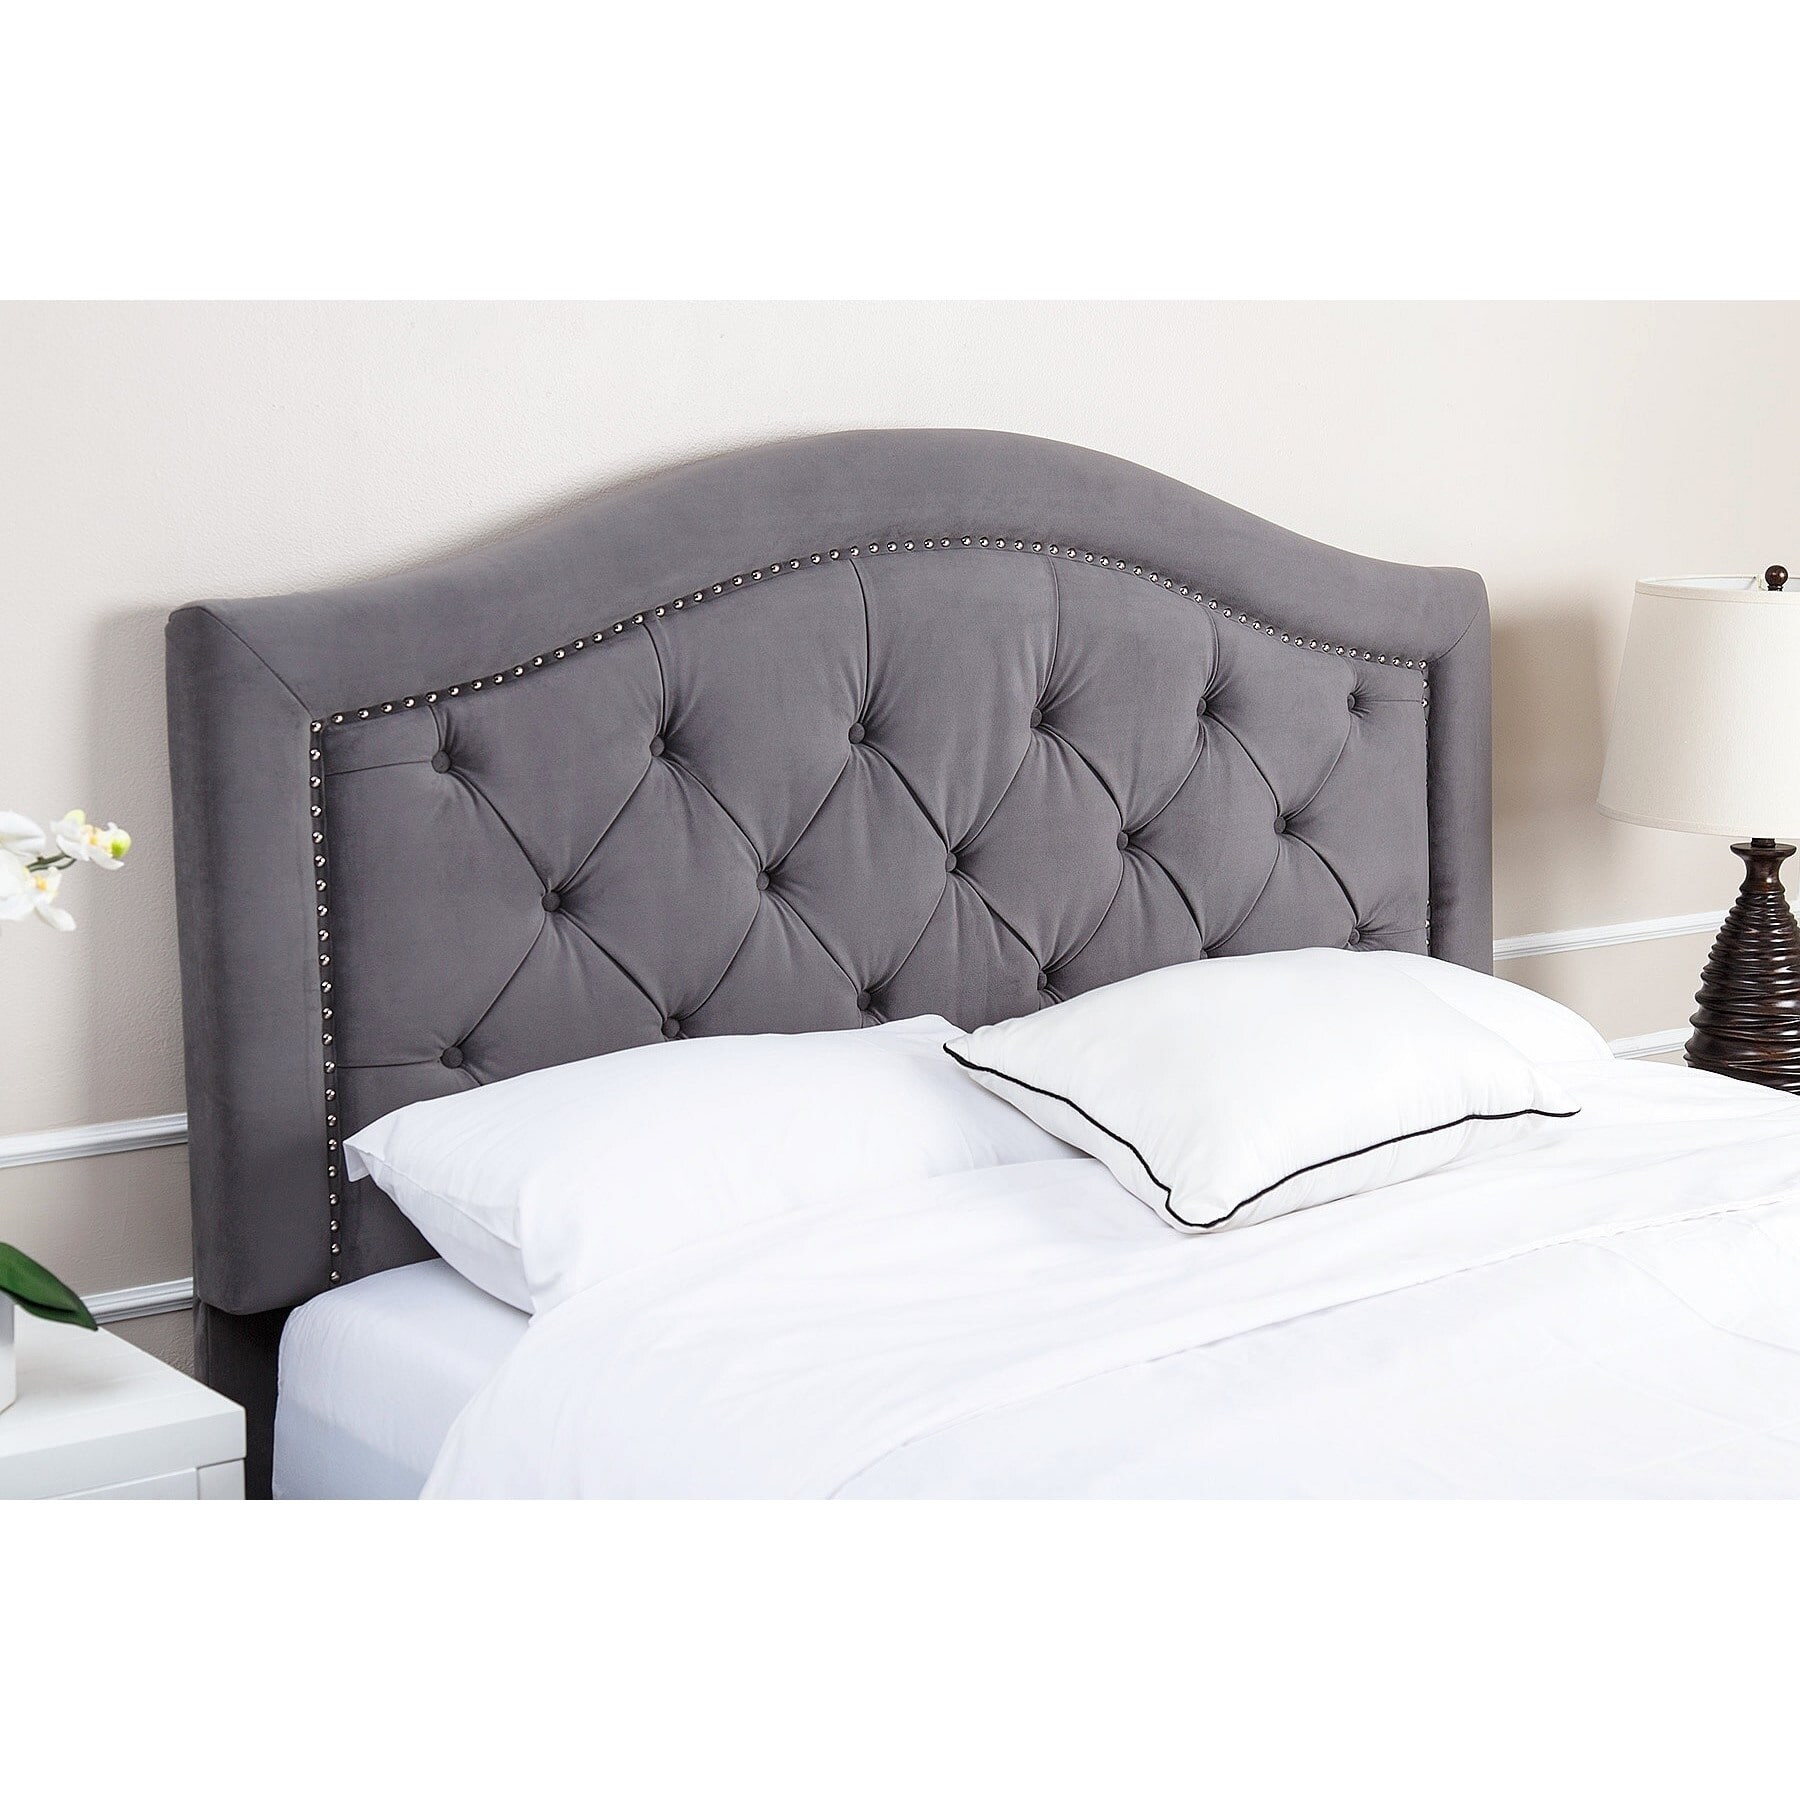 Abbyson Living King//California King Size Bonded Leather Upholstered Headboard with Brass Nailhead Trim Brown